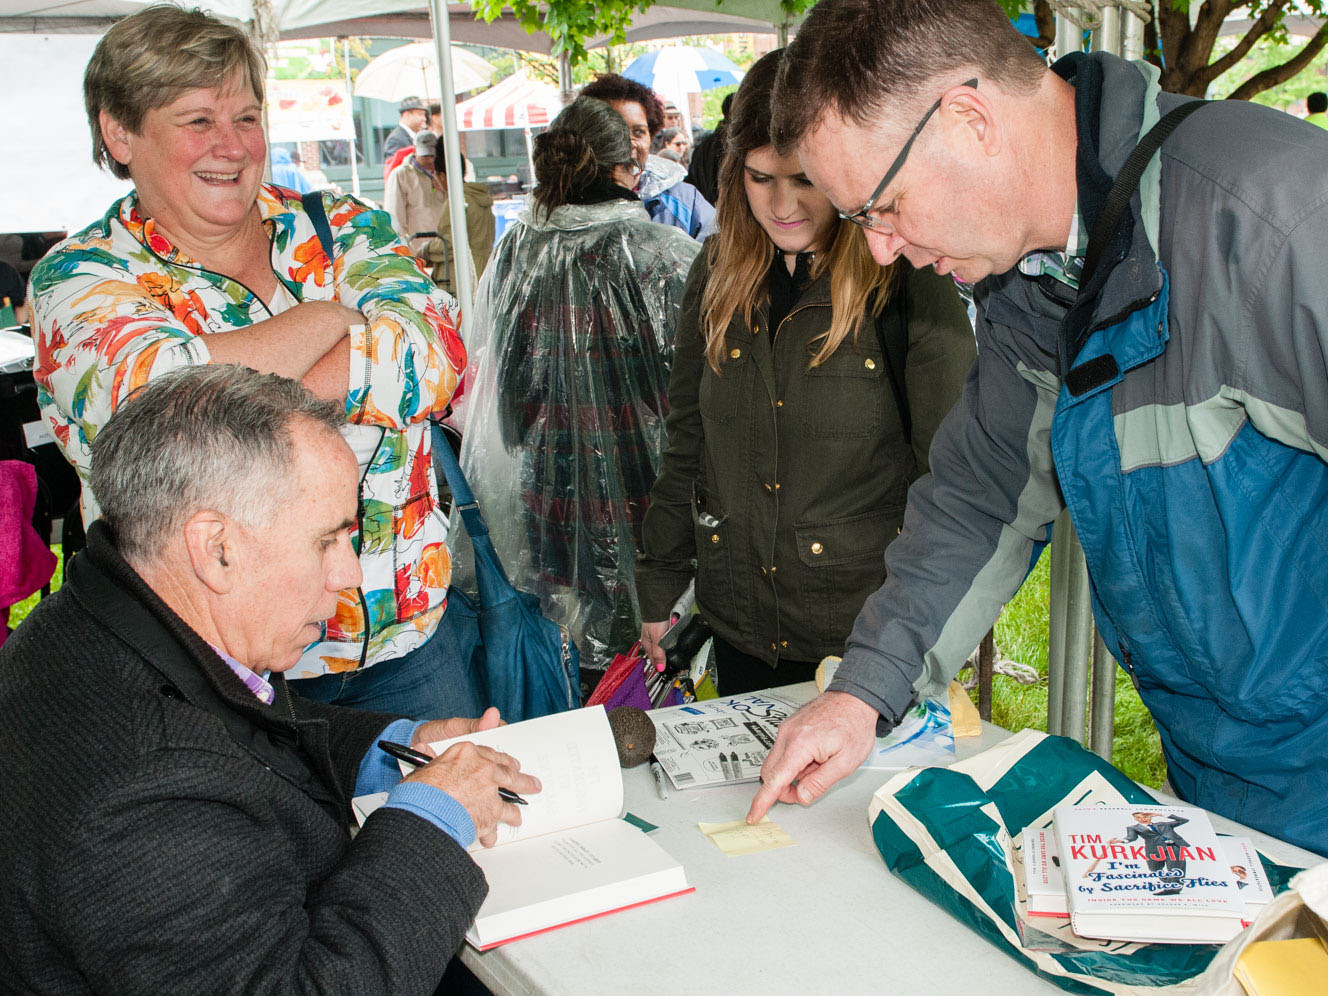 Gallery 2 - Author and baseball analyst Tim Kurkjian signed his latest book at the 2016 festival.